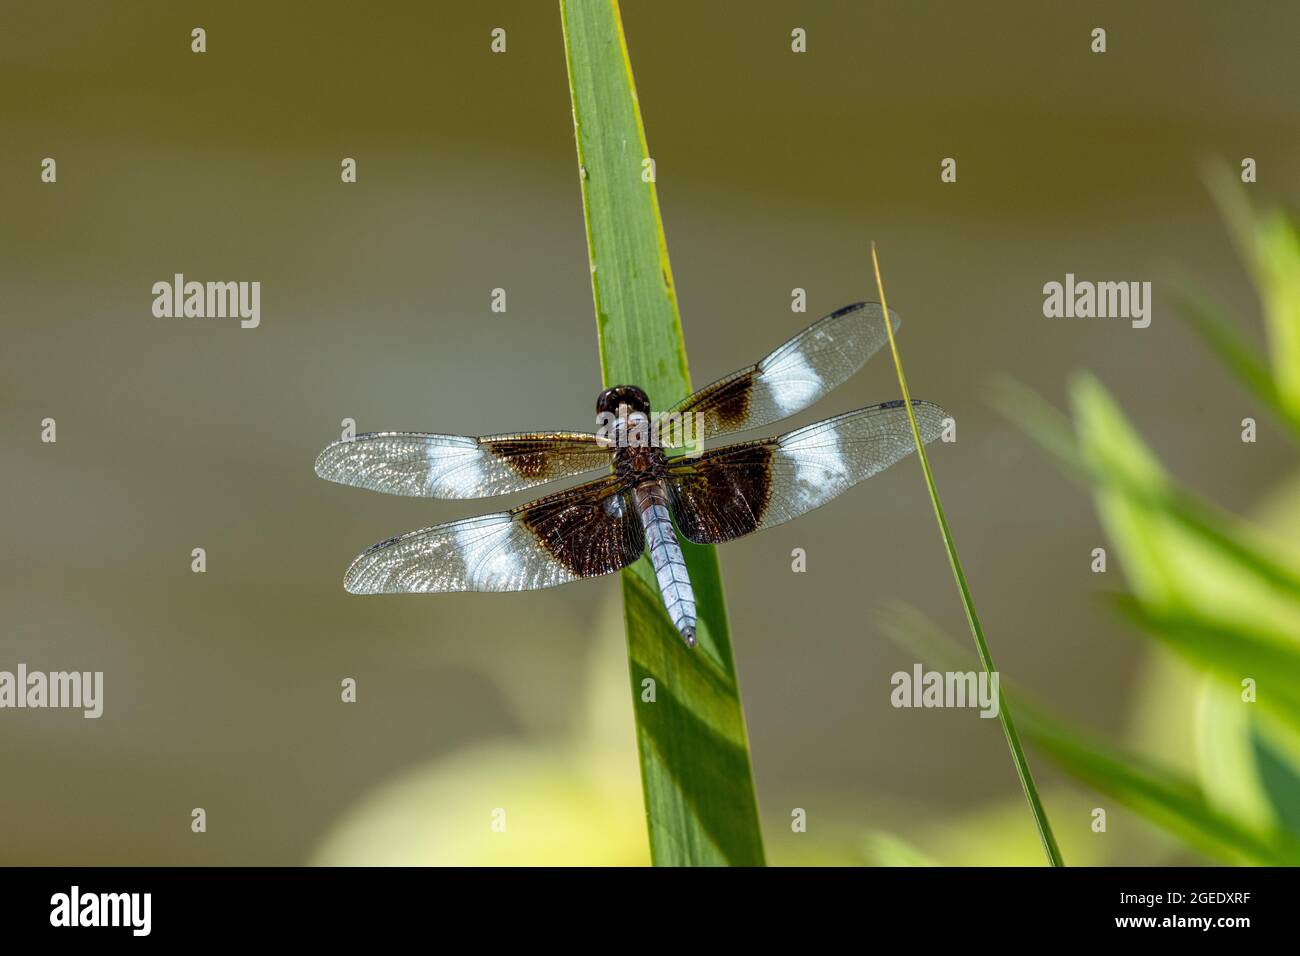 Twelve-spotted skimmer perched on plant Stock Photo